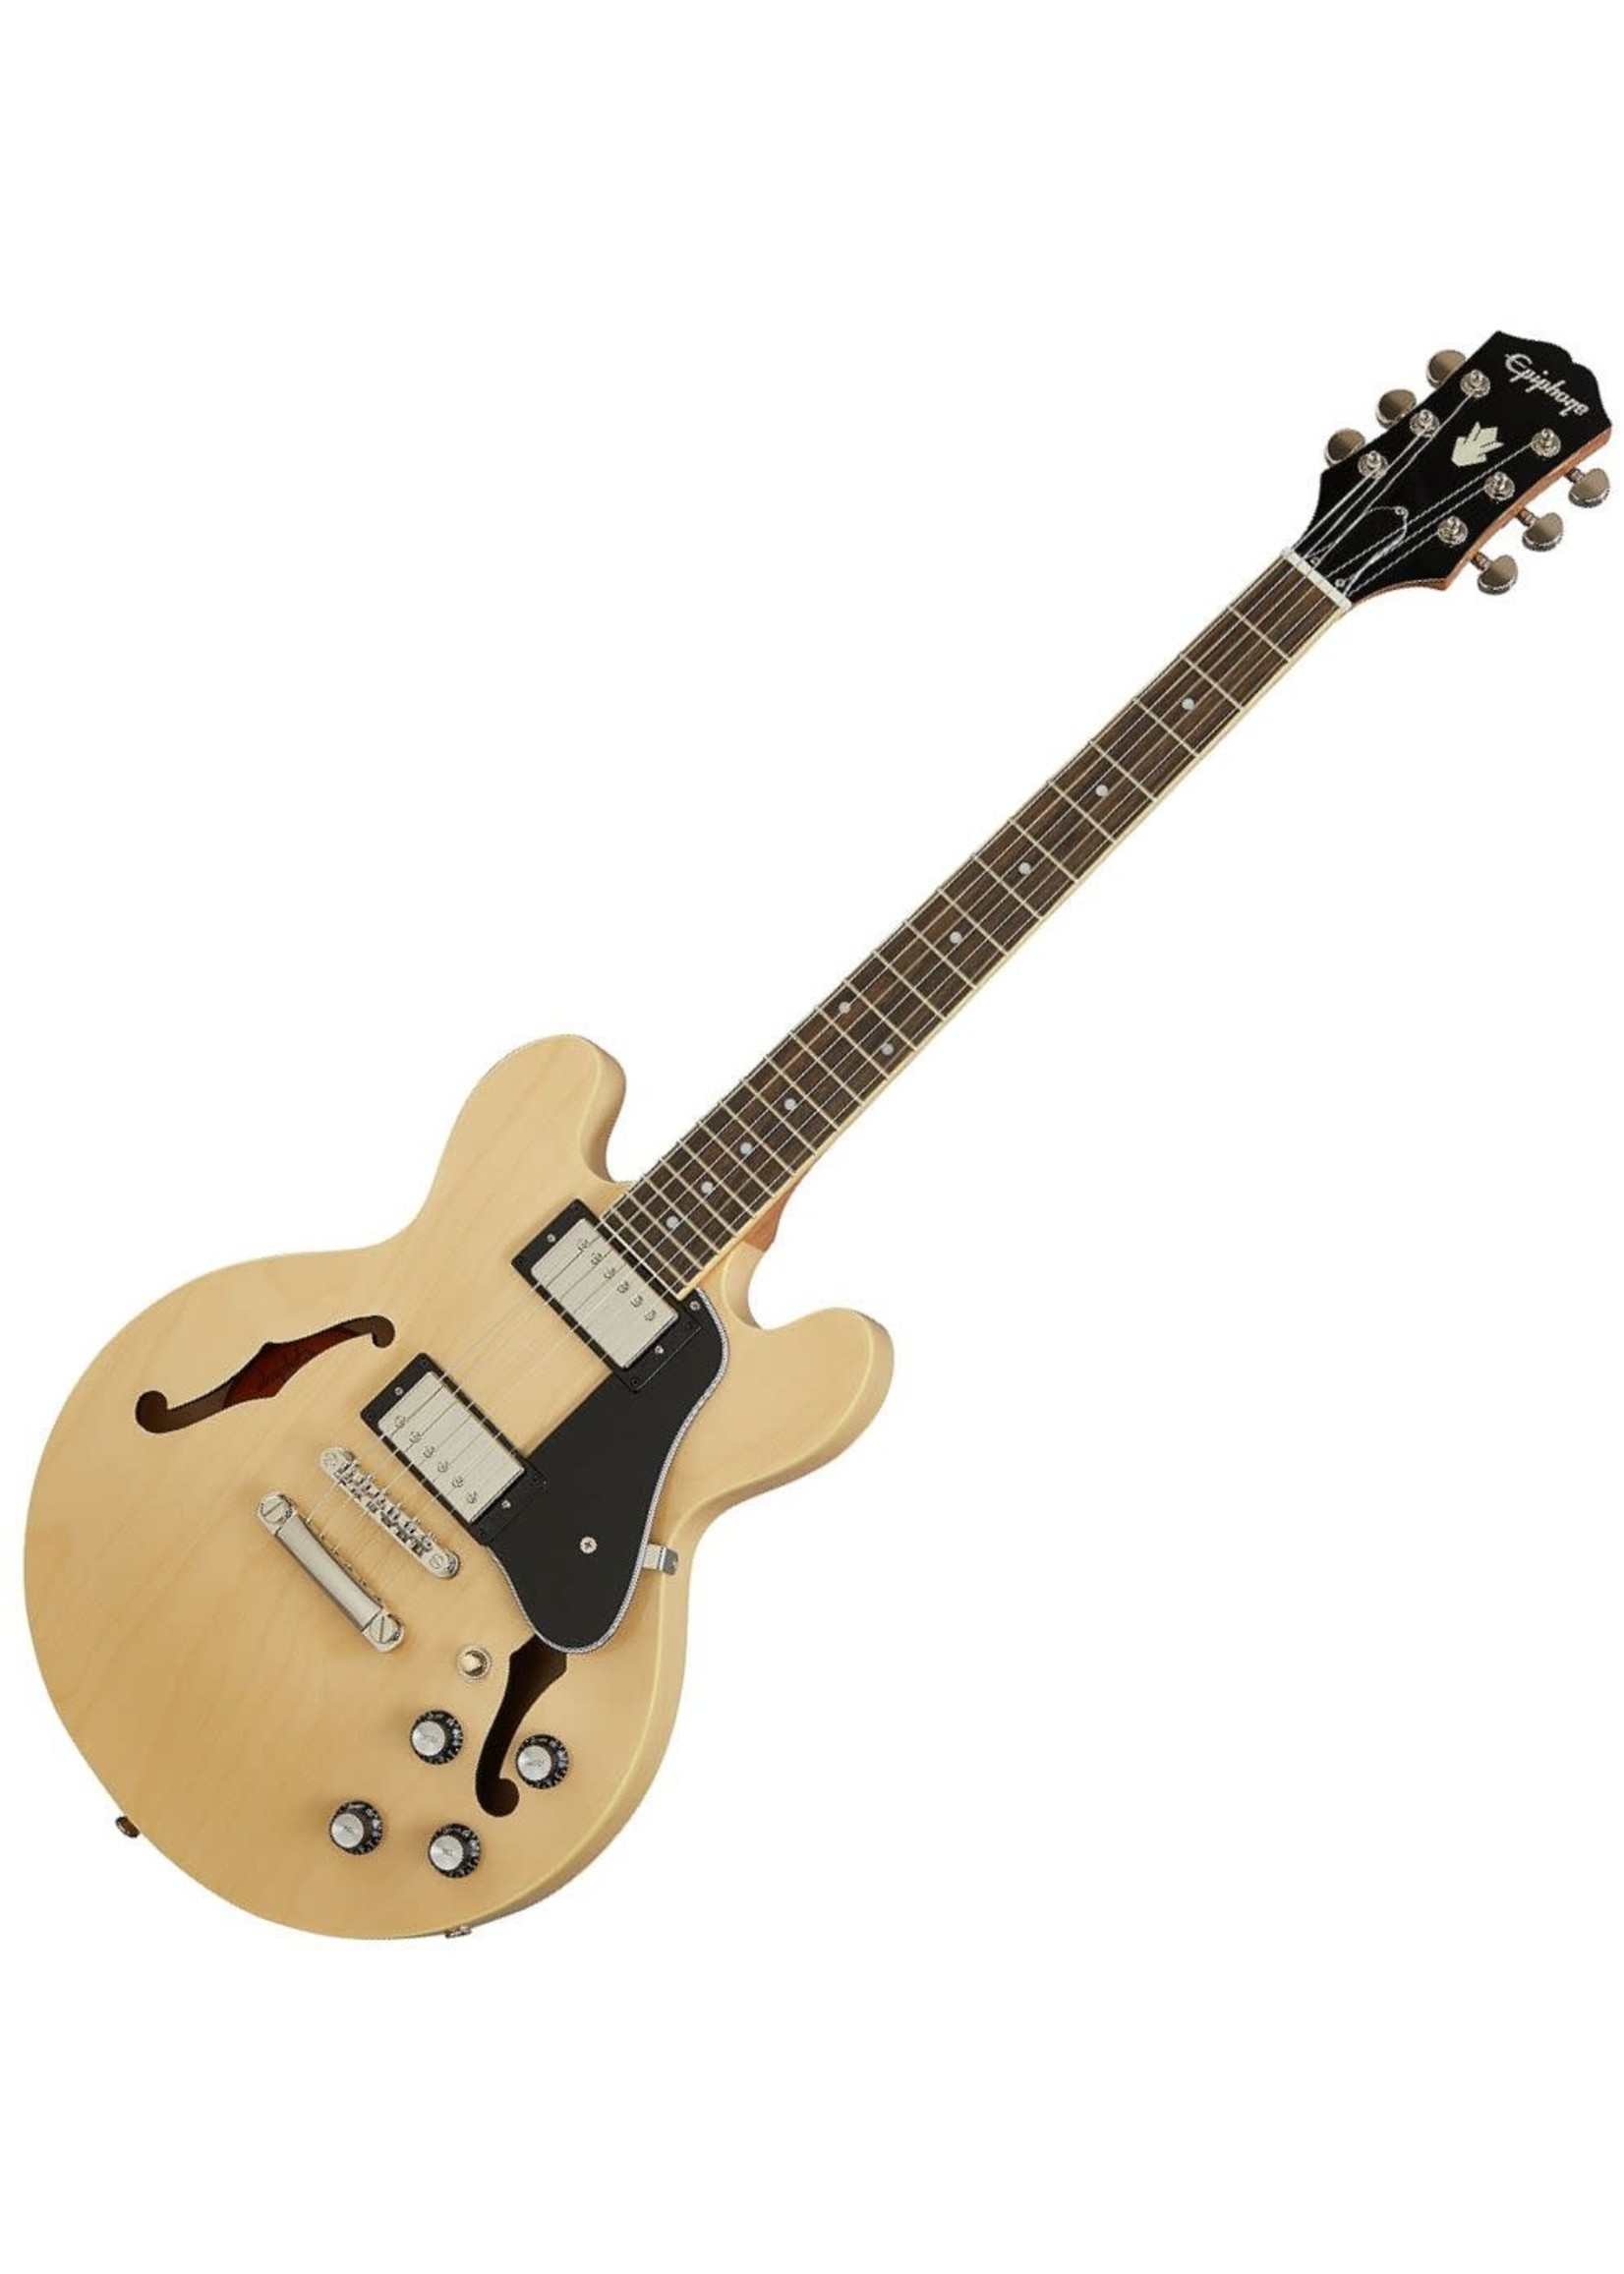 Epiphone Epiphone IGES339NANH Inspired by Gibson ES-339 Series 6-String RH Semi-Hollowbody Electric Guitar-Natural iges-339-nanh